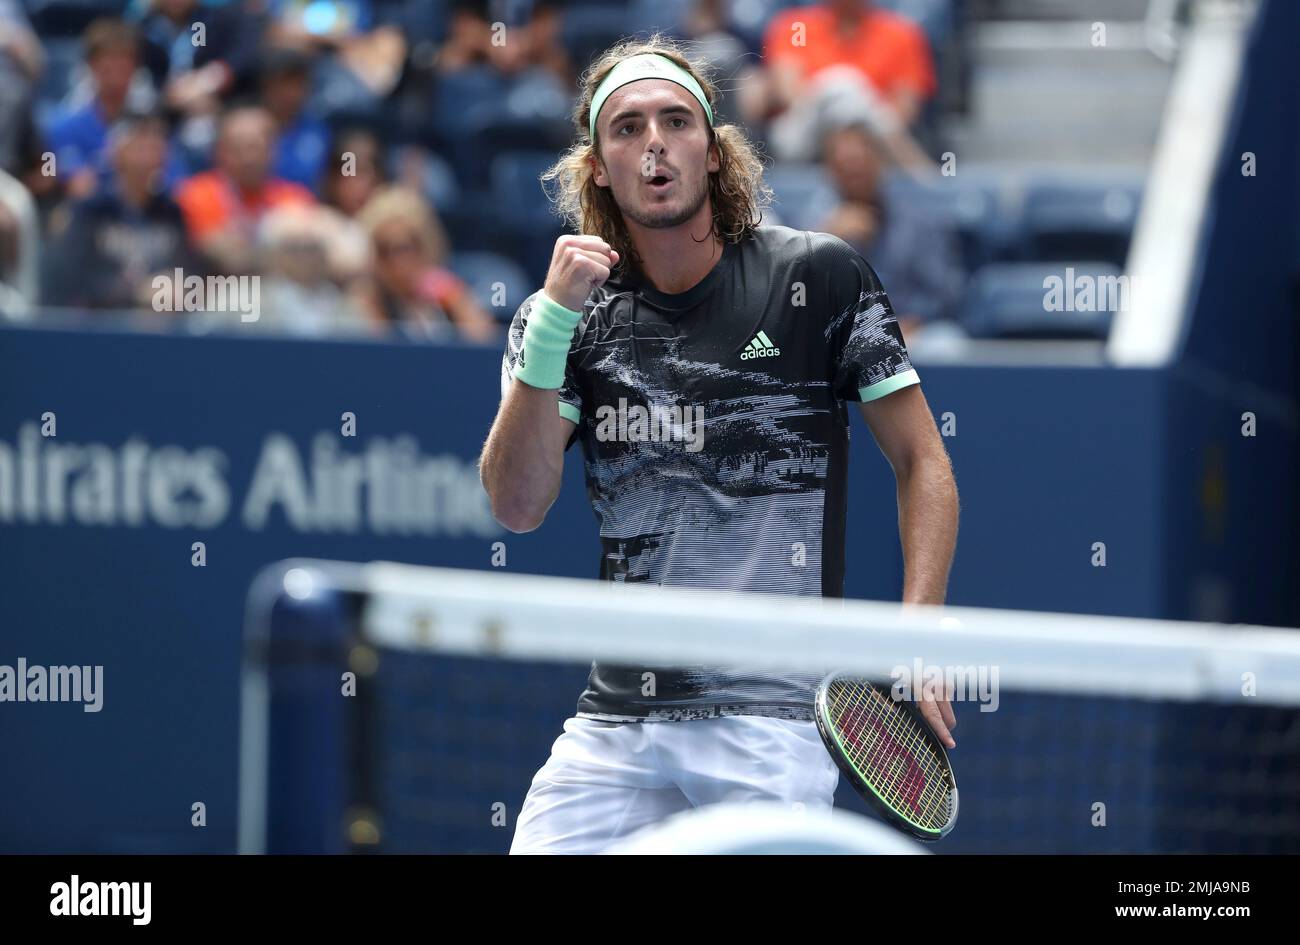 Stefanos Tsitsipas, of Greece, reacts after scoring a point against Andrey Rublev, of Russia, during the first round of the US Open tennis tournament Tuesday, Aug